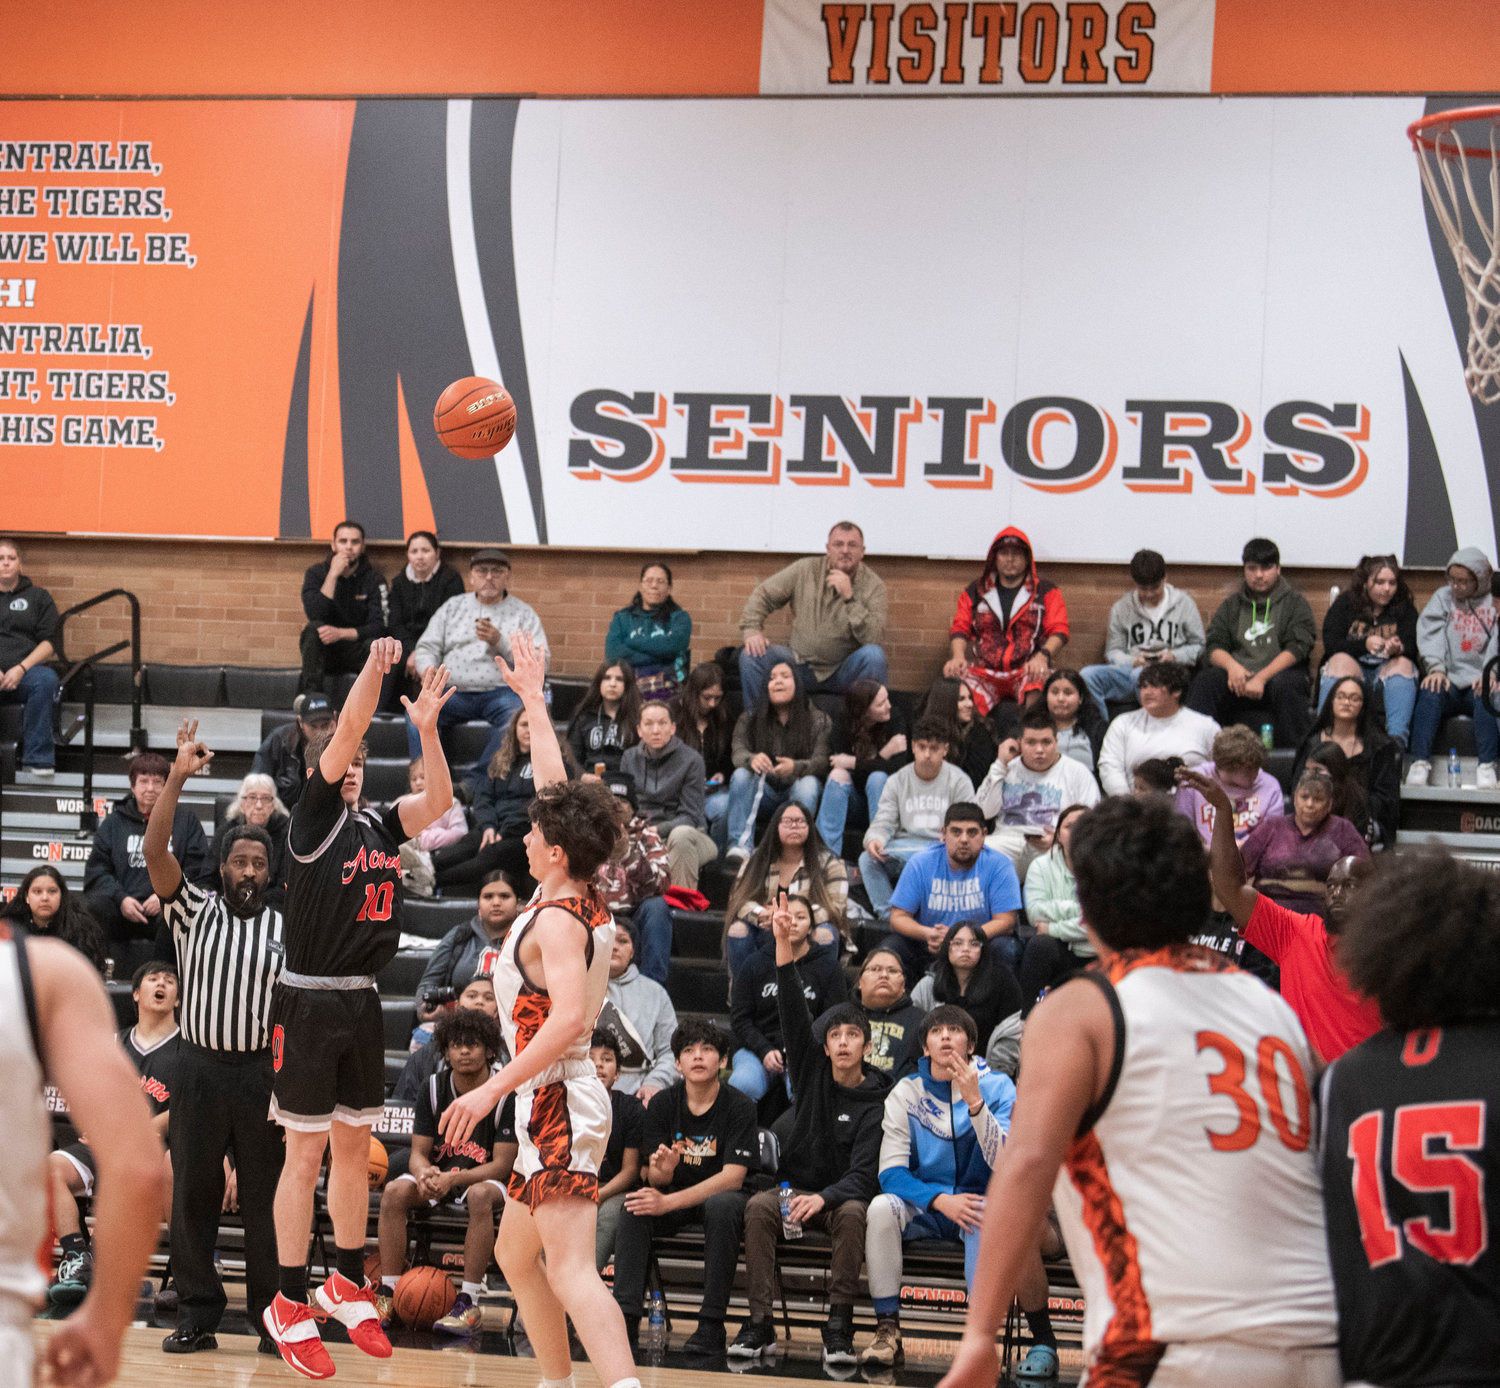 Oakville’s Hunter Russell (10) puts up a 3-point shot Monday night during a game against Centralia.